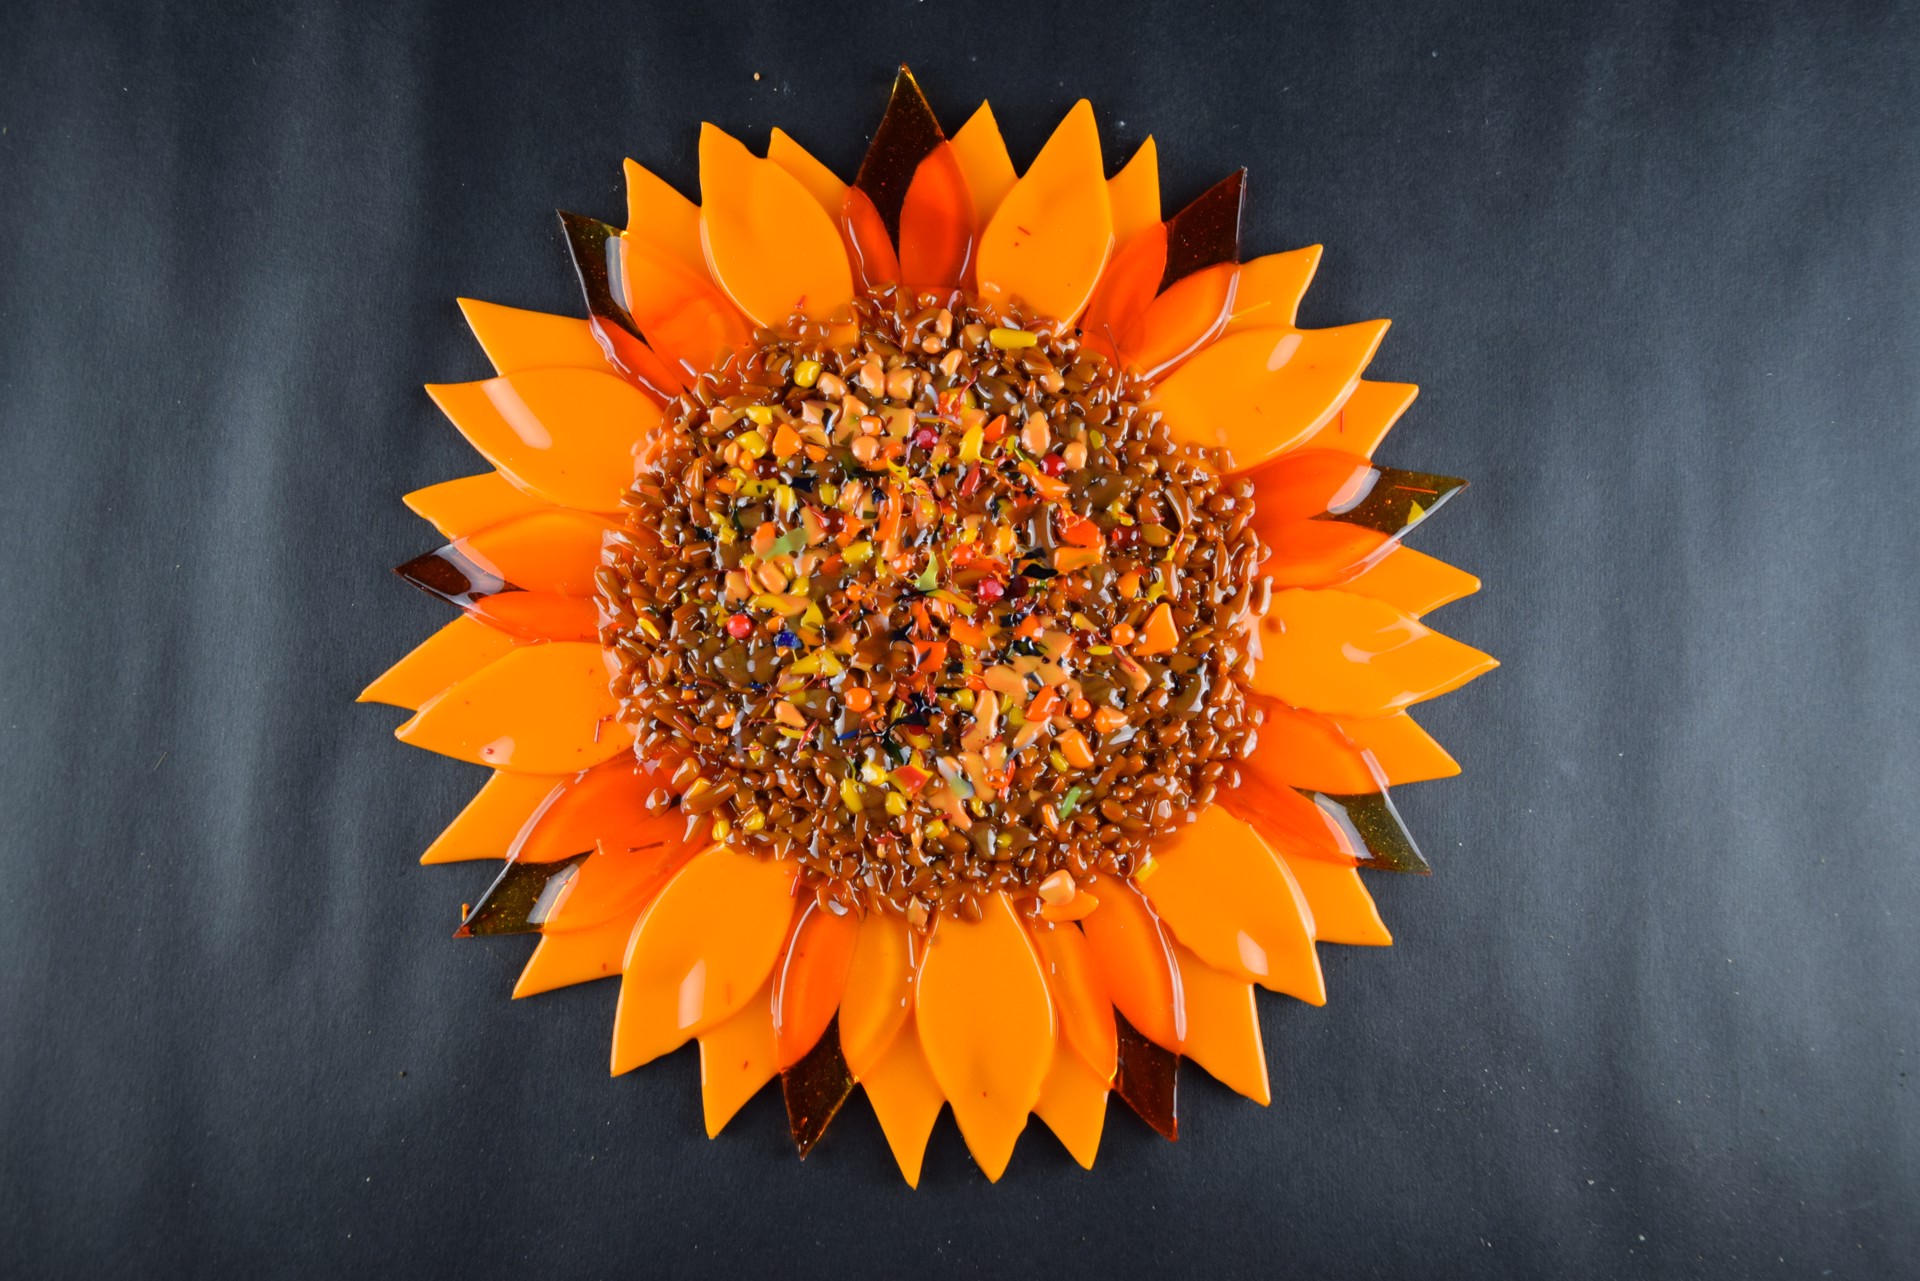 Sunflower Wallhanging by Doug and Barbara Henderson